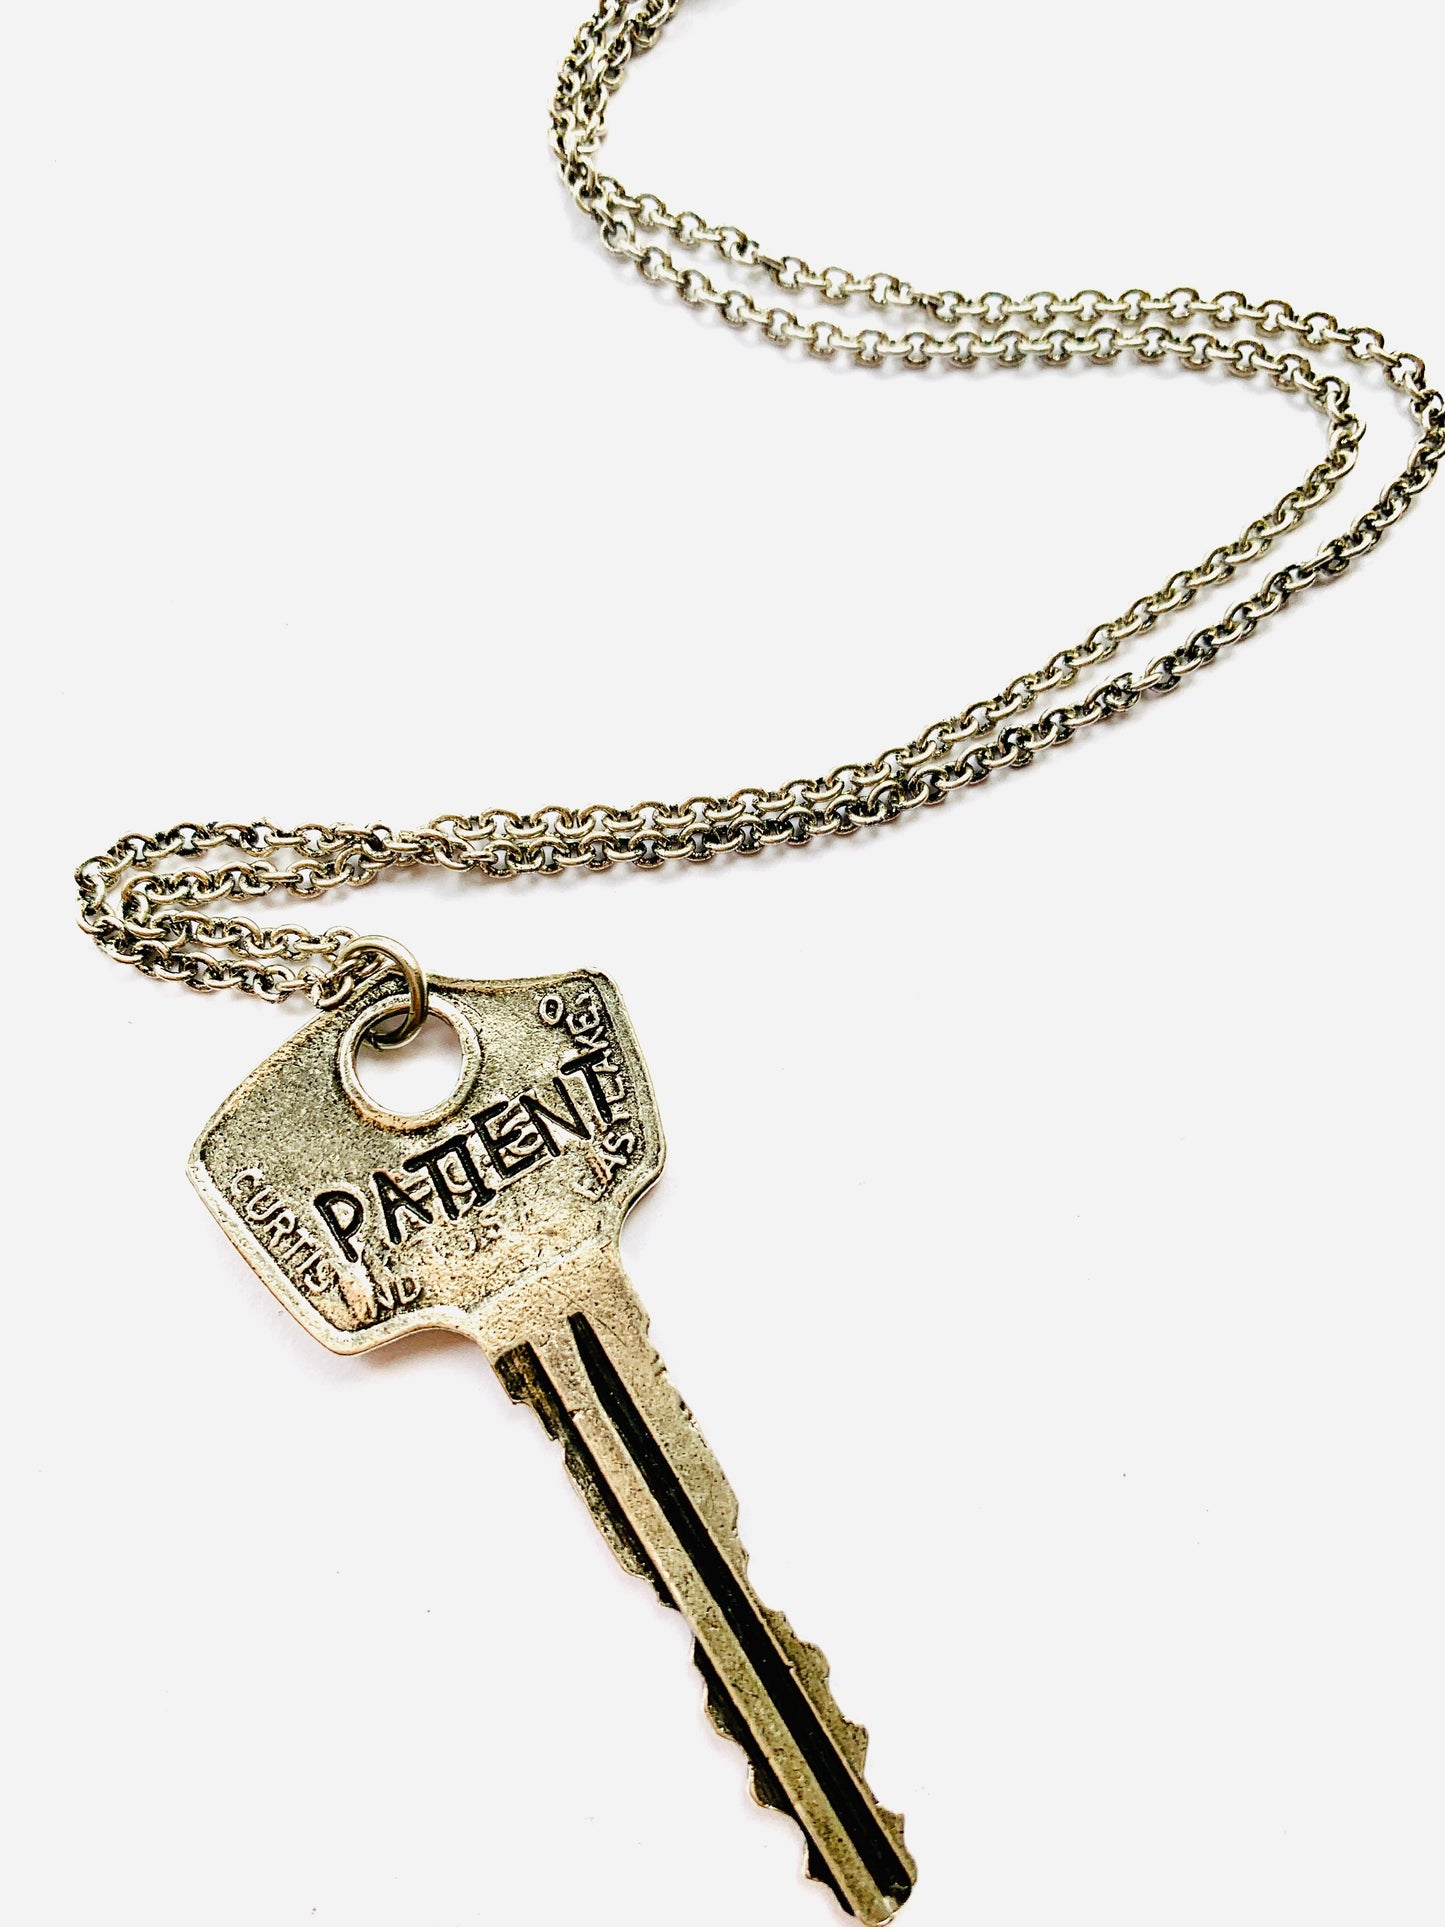 Be In The Now Hand Stamped Key Necklace